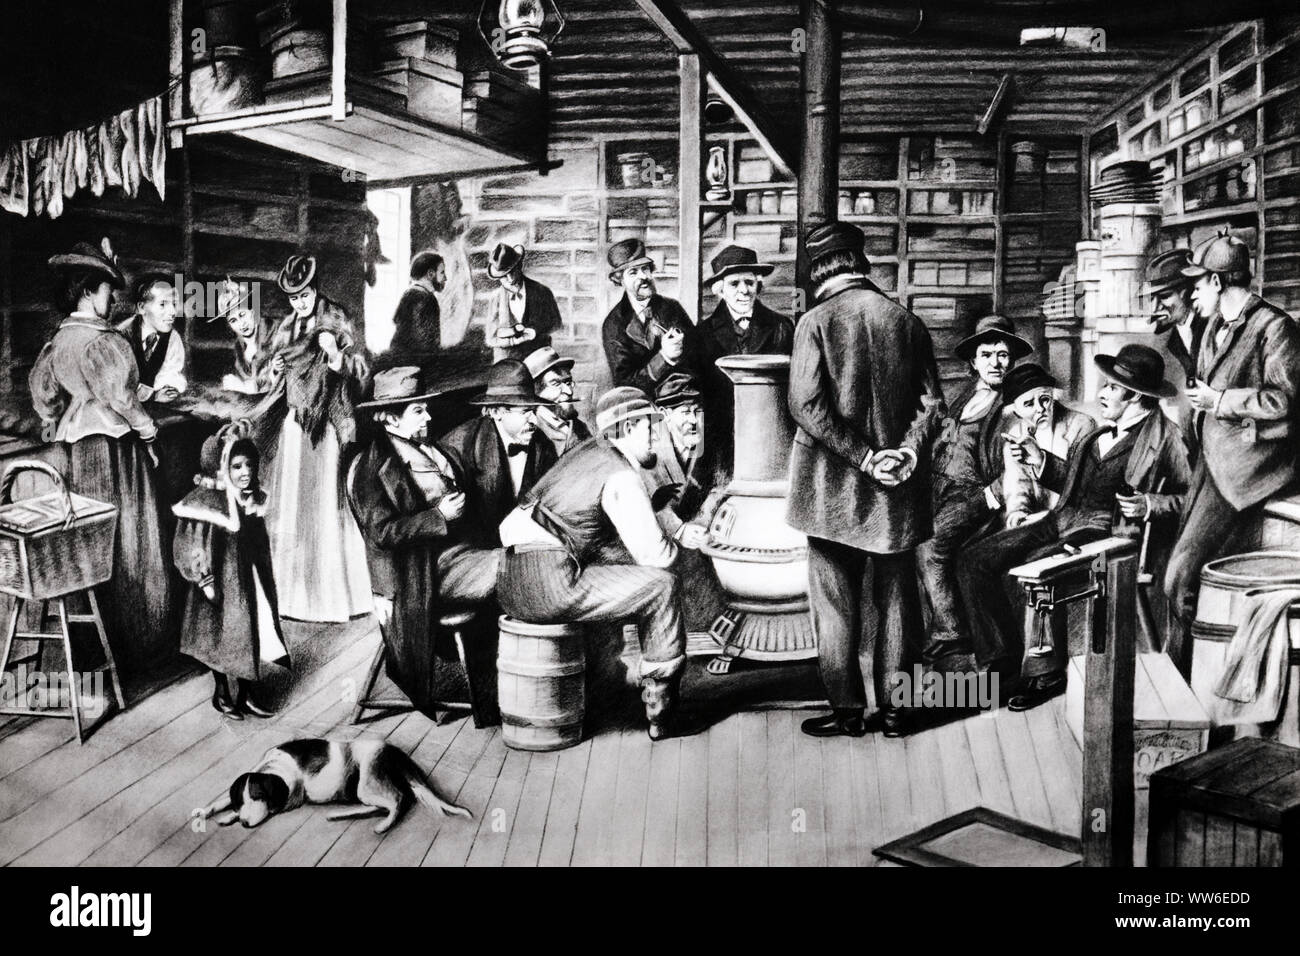 1870s 19TH CENTURY INTERIOR RURAL AMERICAN GENERAL STORE MEN GATHERED AT HOT POTBELLY STOVE WOMEN SHOPPING SLEEPING DOG LYING - a8002 HAR001 HARS COMMUNICATION FRIEND JOY LIFESTYLE FEMALES GOSSIP GENERAL RURAL UNITED STATES COPY SPACE FRIENDSHIP FULL-LENGTH HALF-LENGTH LADIES PERSONS SHOPS UNITED STATES OF AMERICA MALES AMERICANA SHARE GOSSIPING B&W SHOPPER SHOPPERS MAMMALS LEISURE CUSTOMER SERVICE CANINES SOCIETY POLITICS STORES POOCH LIE CONNECTION 19TH CENTURY CONCEPTUAL 1870s FRIENDLY HOUND DOG LET CANINE COMMERCE GATHERED JUVENILES MAMMAL MEETING PLACE POTBELLY TOGETHERNESS Stock Photo